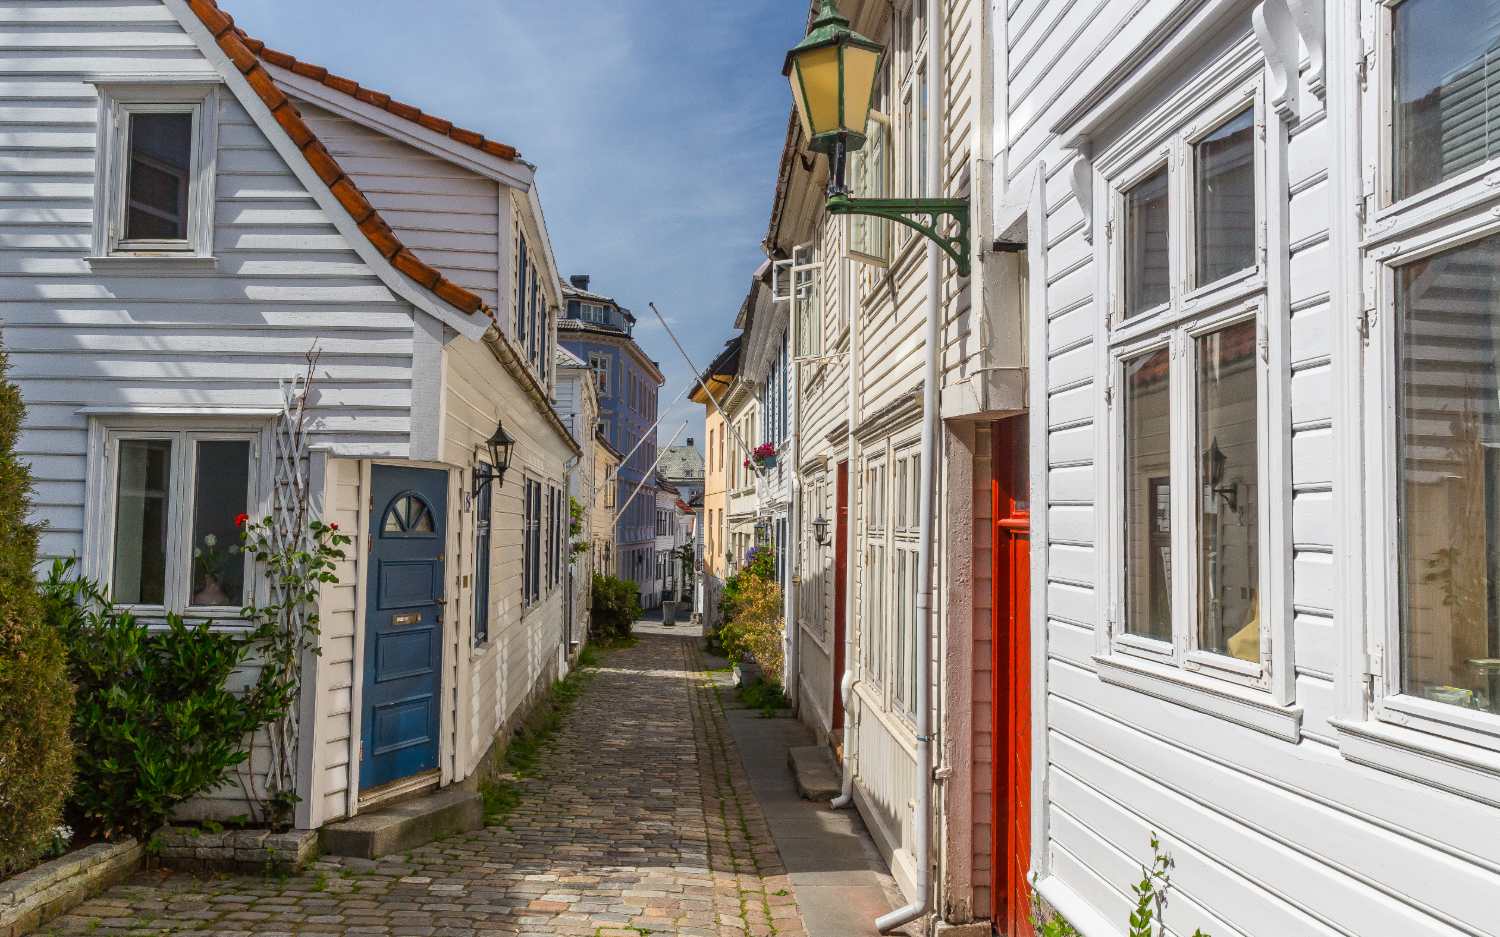 Top things to do - walk the streets of Bergen